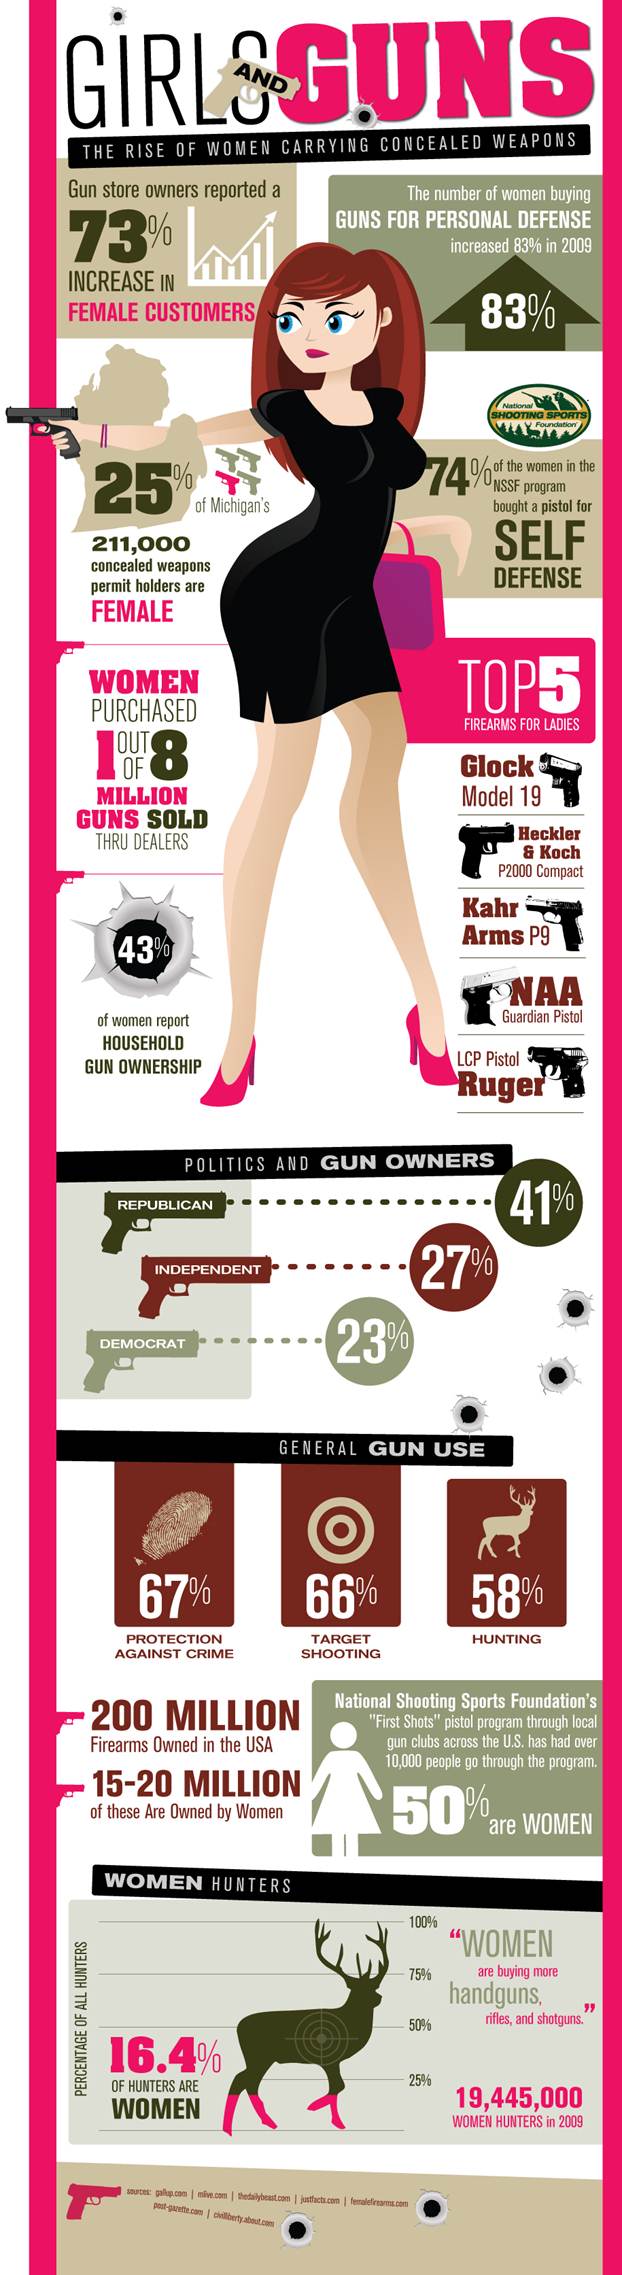 Girls and Guns - The Rise Of Women Carrying Concealed Weapons